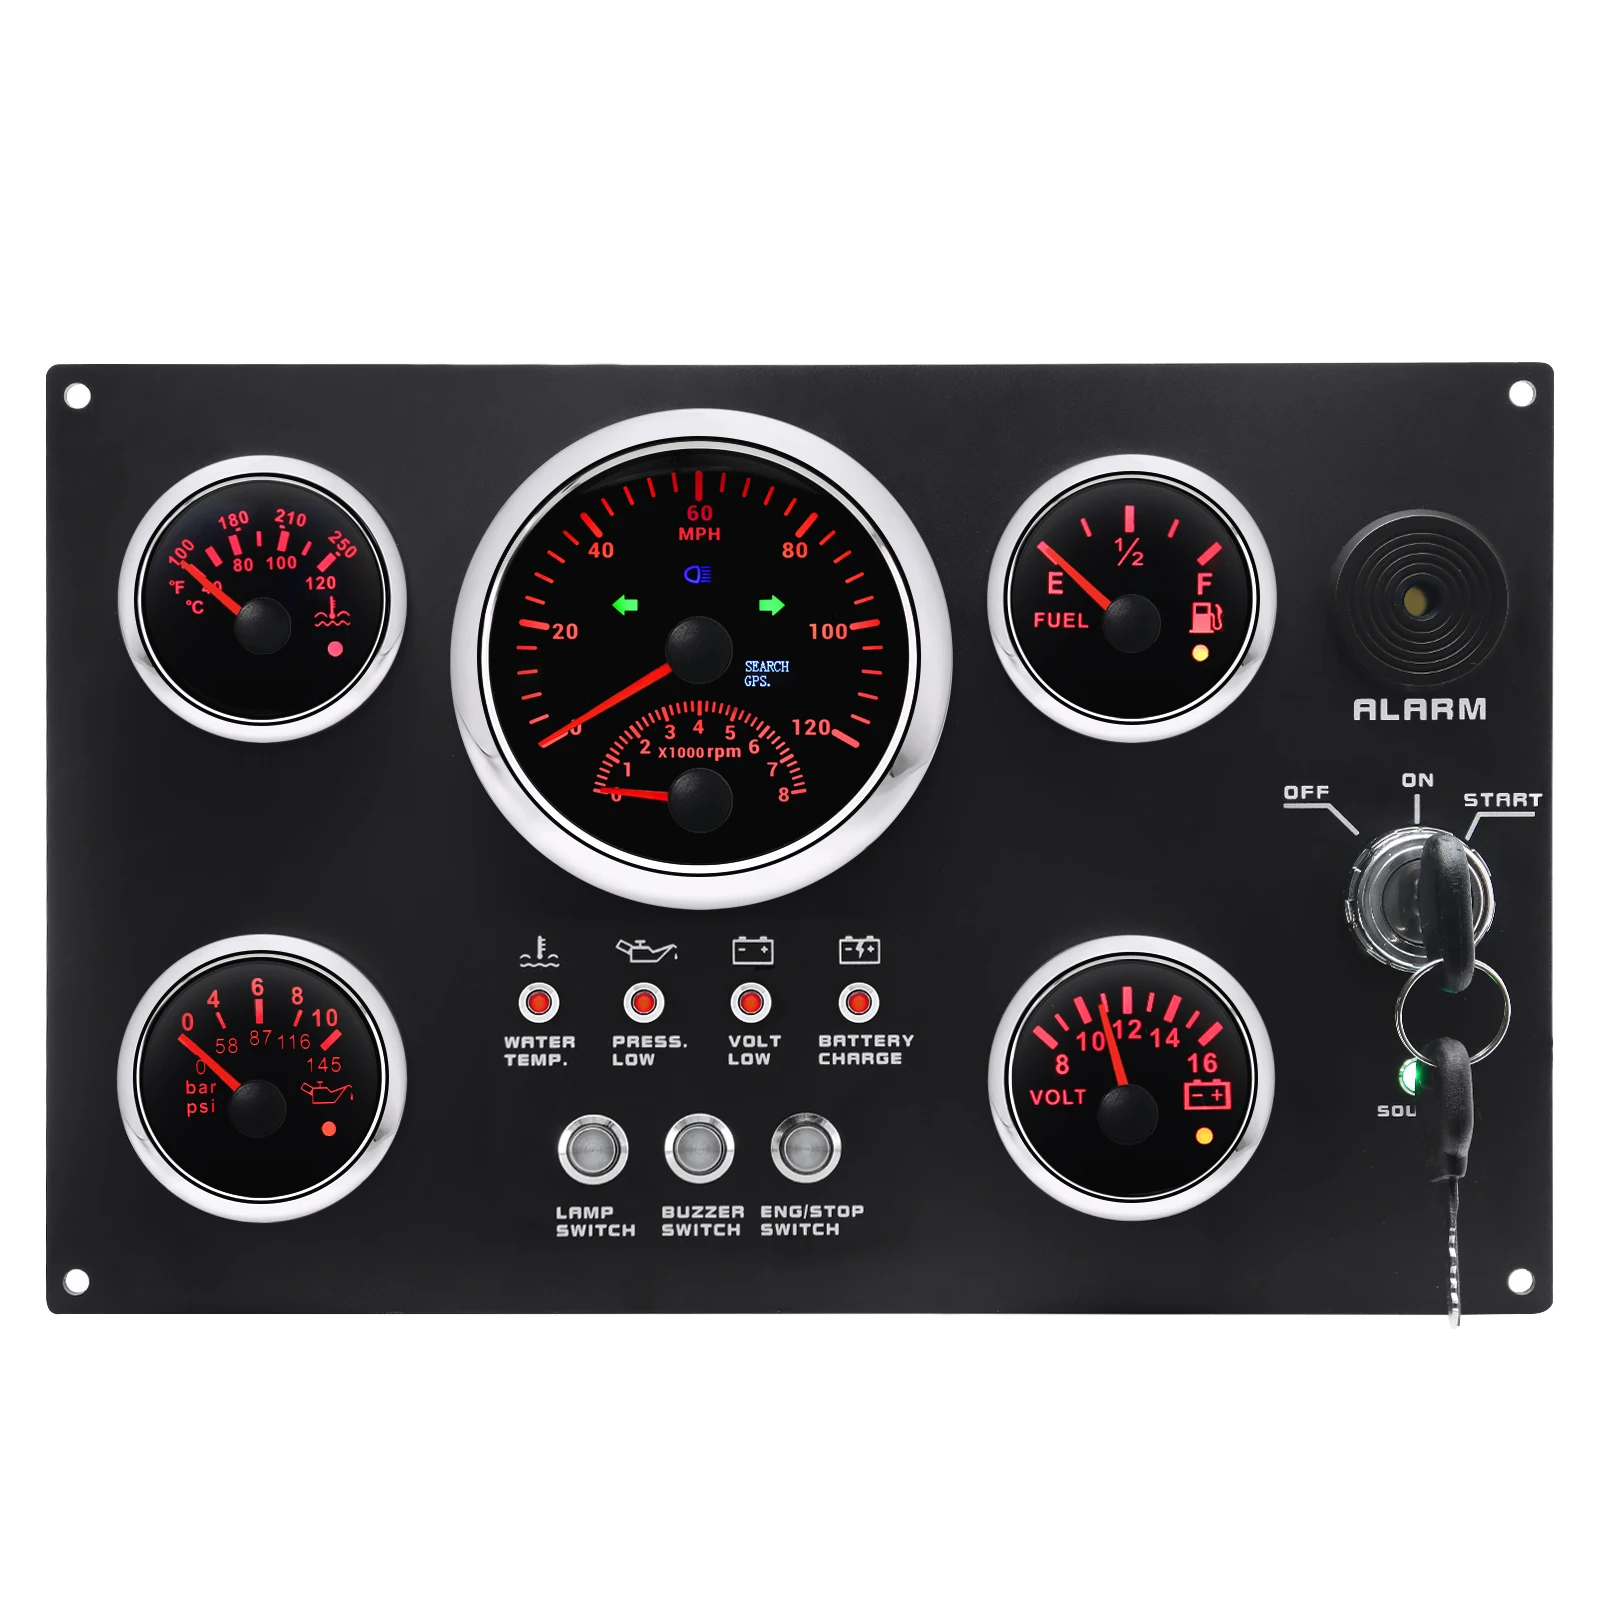 

AD 5 Gauge Set with Marine Diesel Engine Inboard Outboard Instrument Panel 0-120MPH/0-8000RPM Red LED For Marine Boat Car Truck